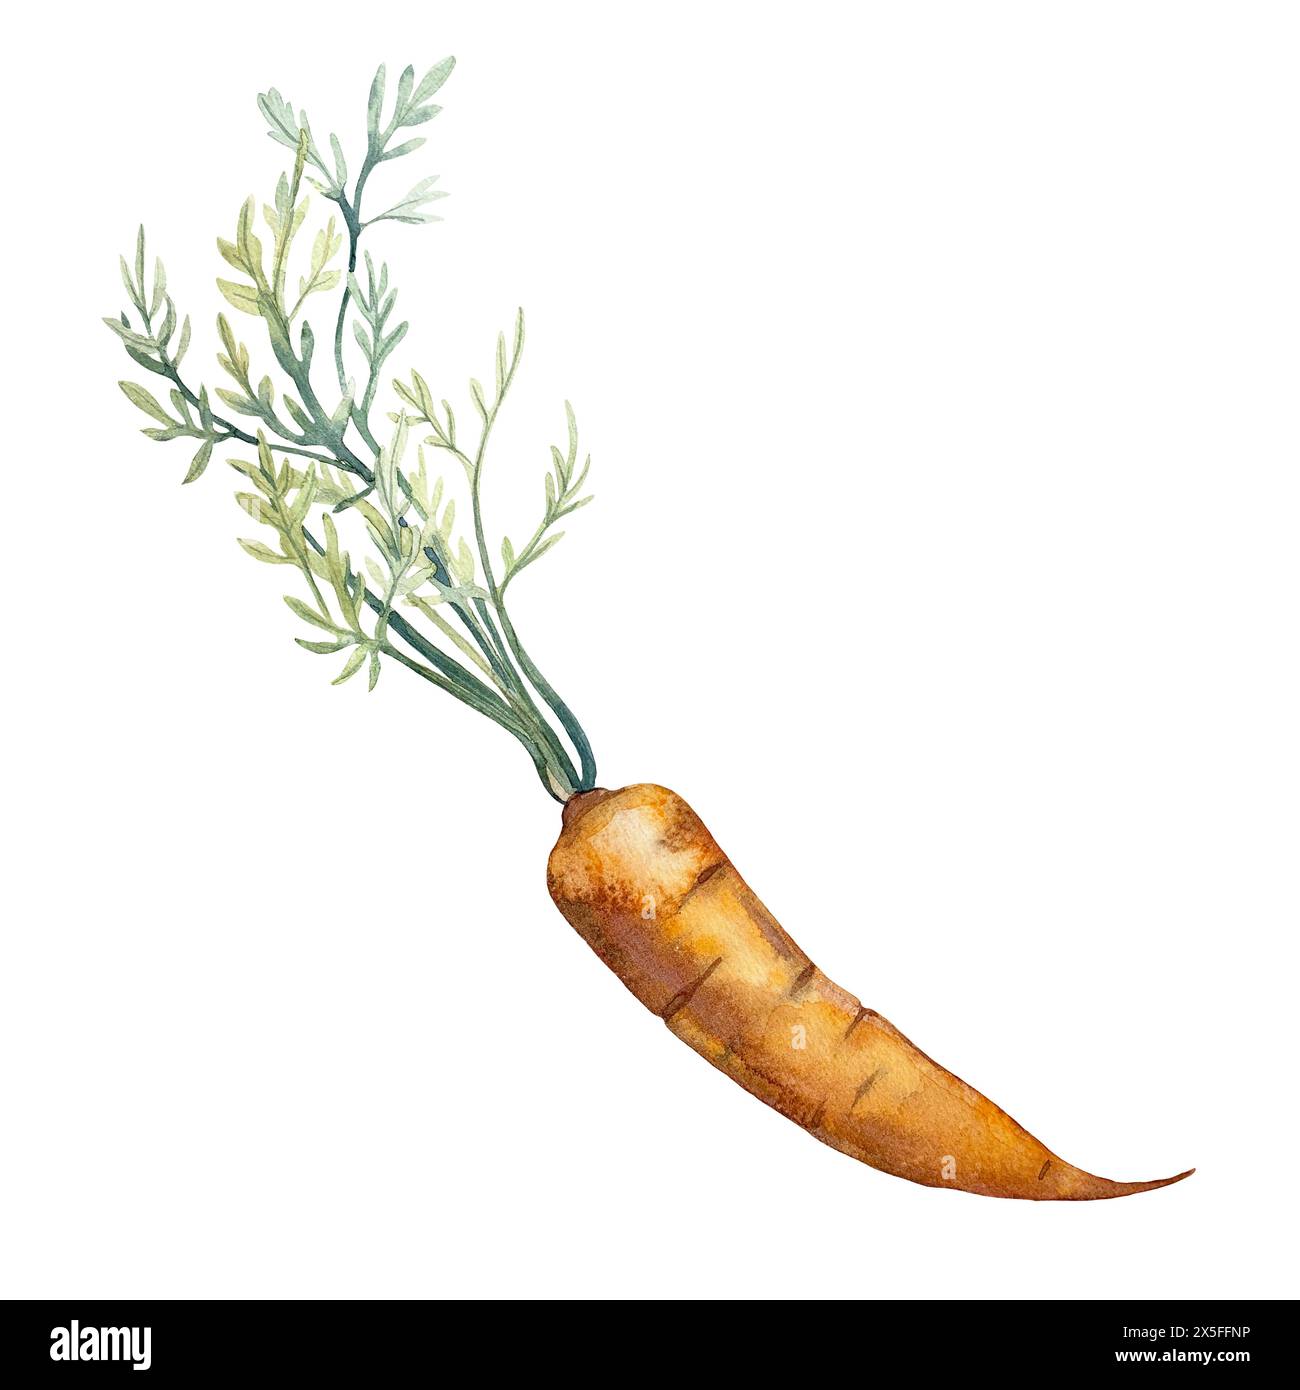 Carrot with leaves watercolor hand drawn illustration isolated on white background.  Stock Photo